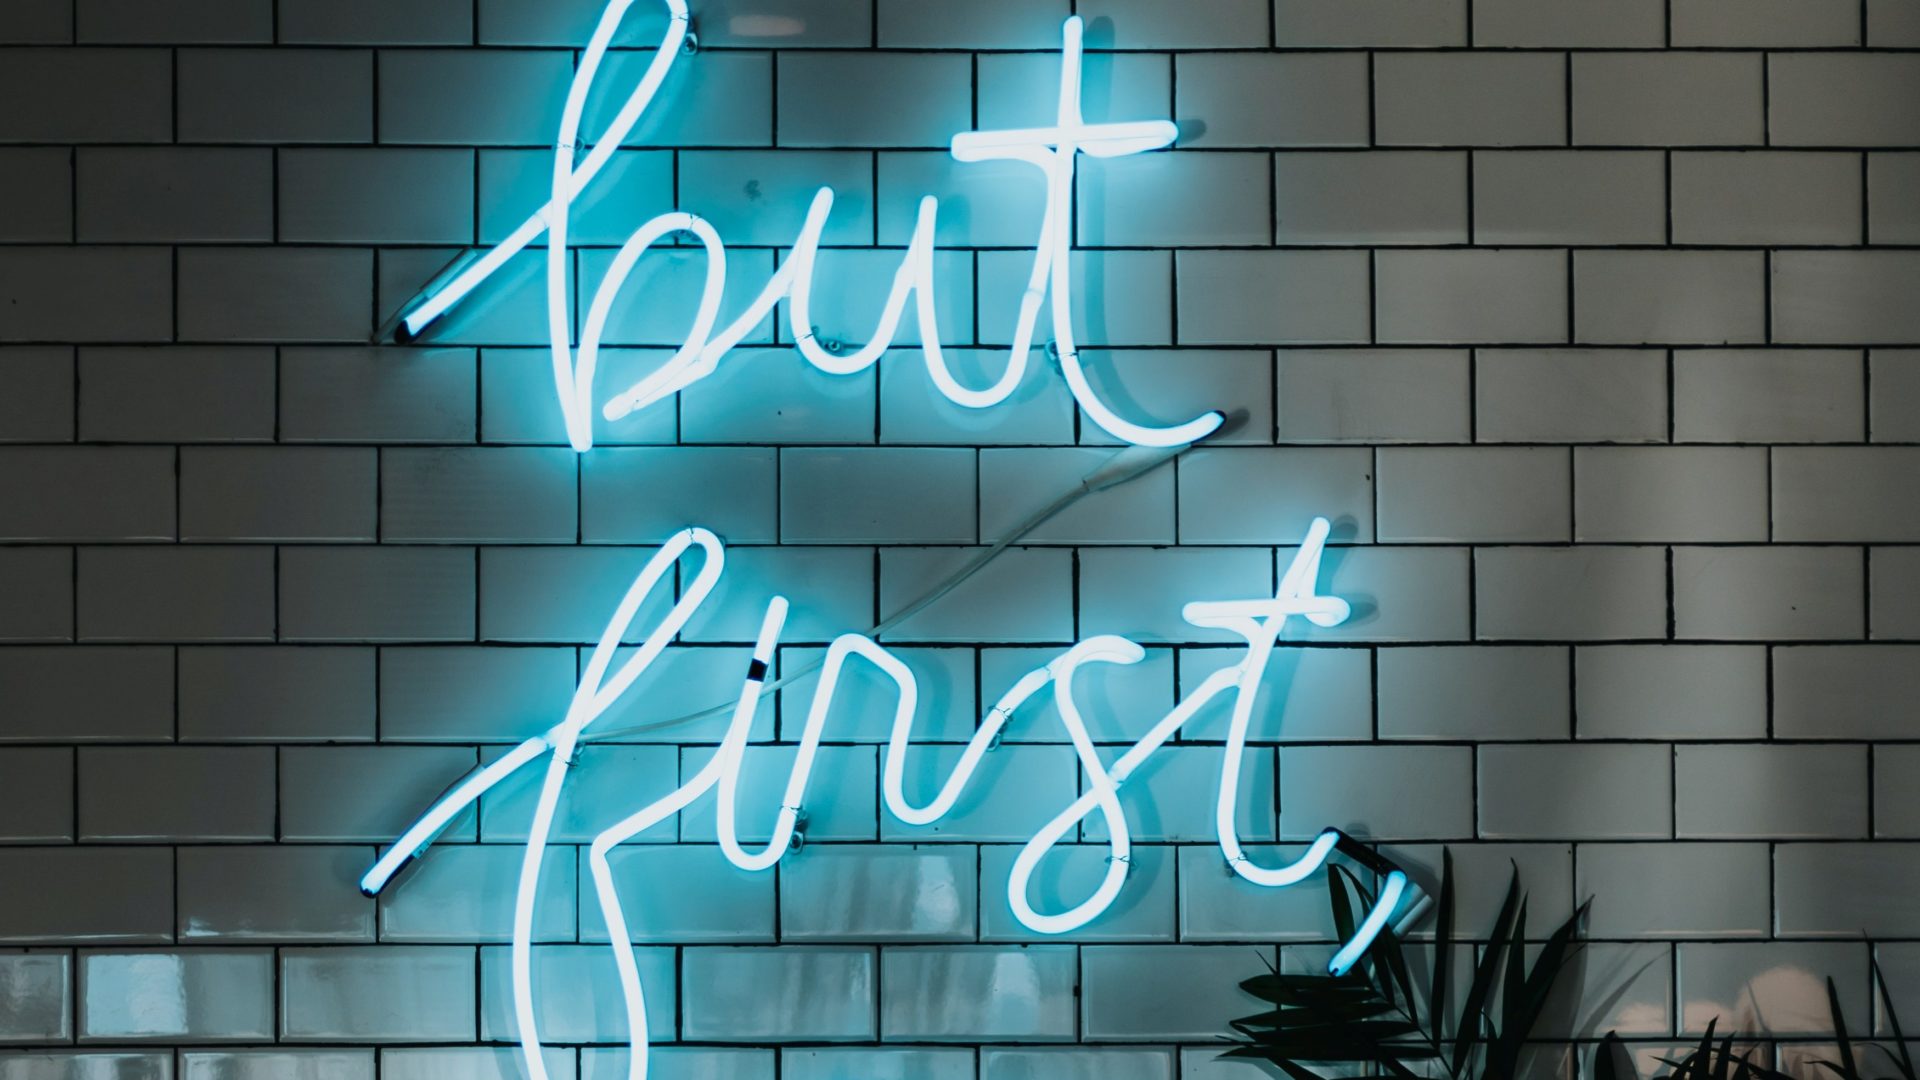 Neon sign saying "but first"